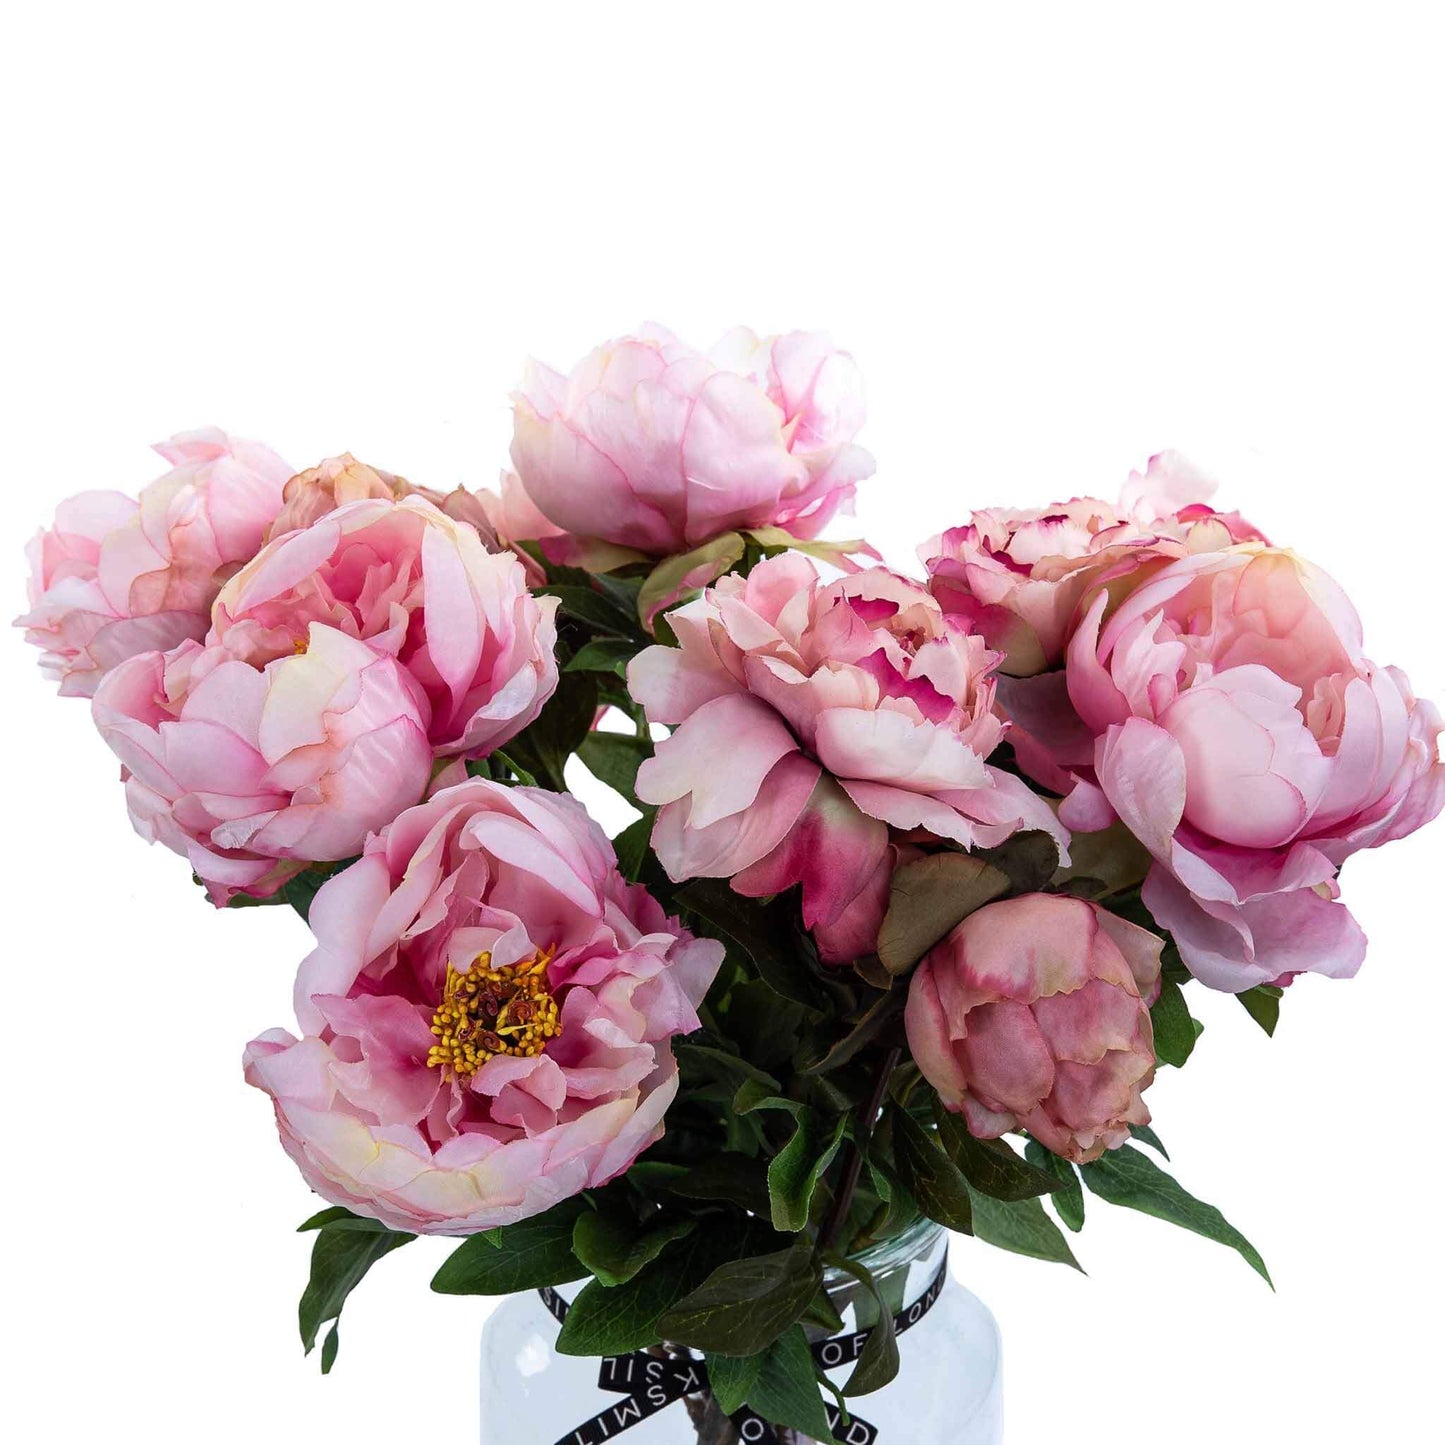 Luxury faux pink peony flowers and buds